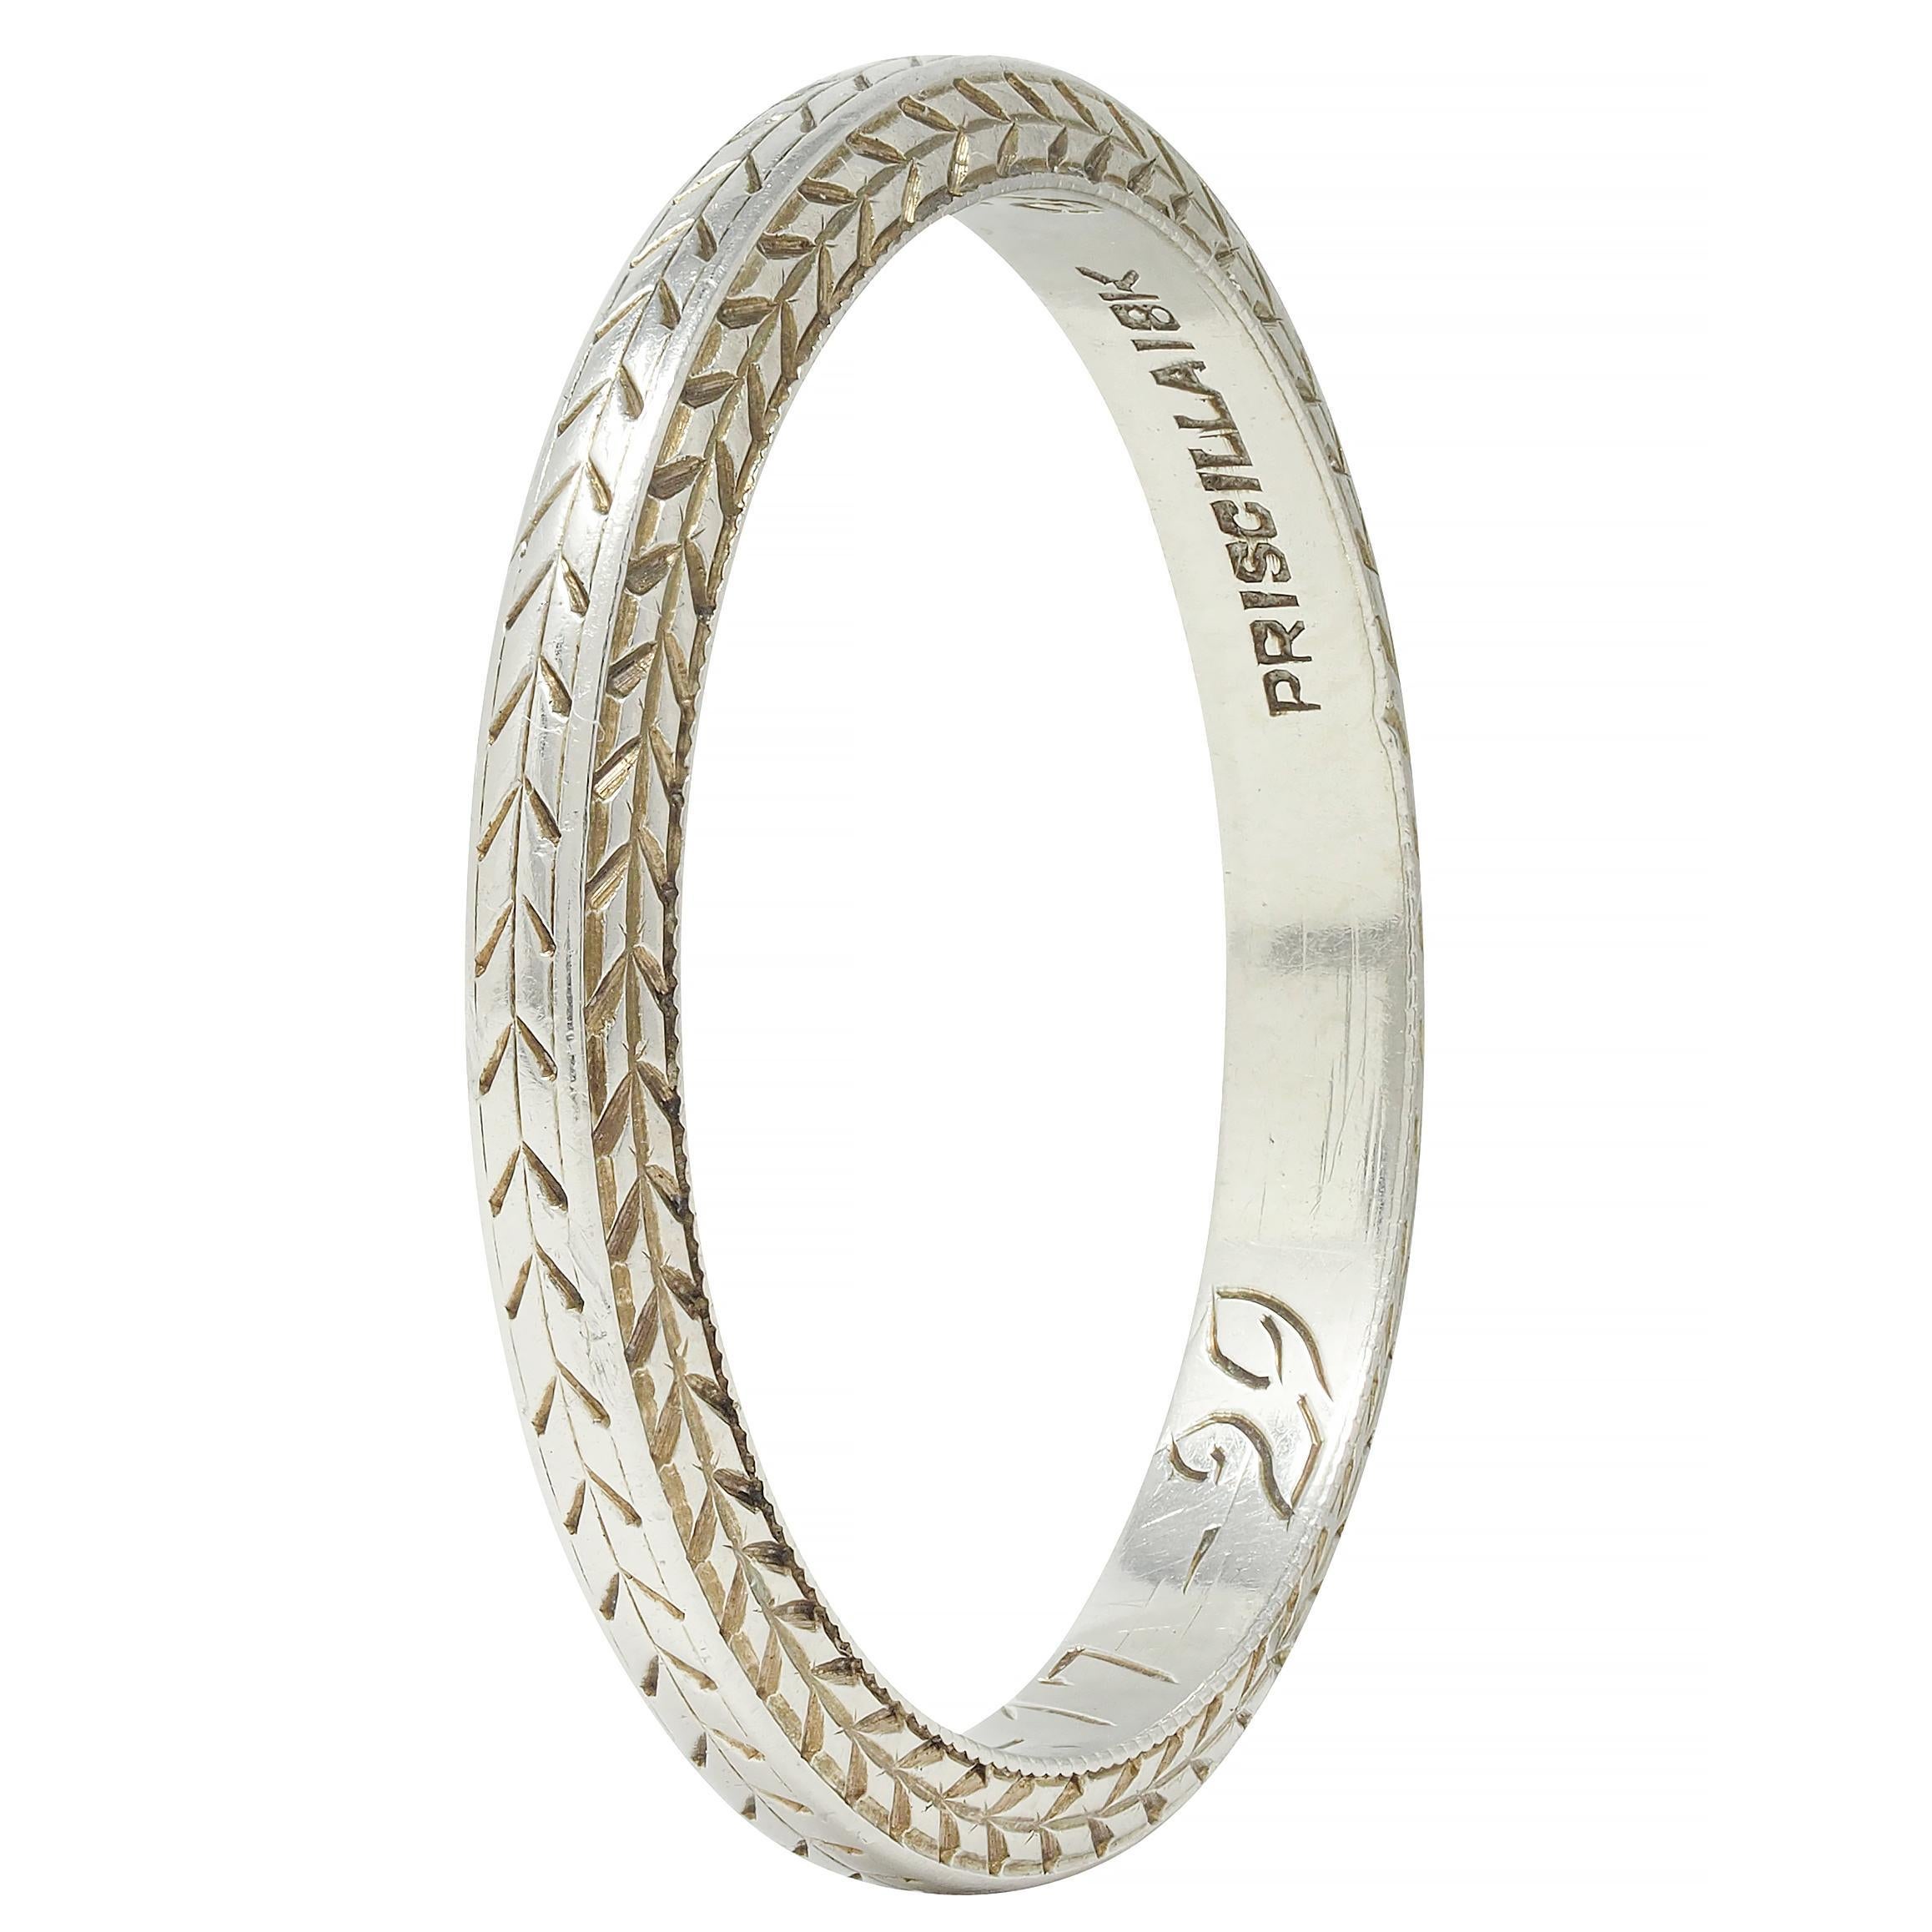 Band ring features engraved wheat motif fully around
Inscribed 'P.R.G to L.M.D 2-17-29.'
Stamped for platinum
With maker's mark for Eisenstadt Mfg. Co. Inc.
Circa: 1929; via dated inscription
Ring size: 5 3/4 and not sizable
Measures North to South